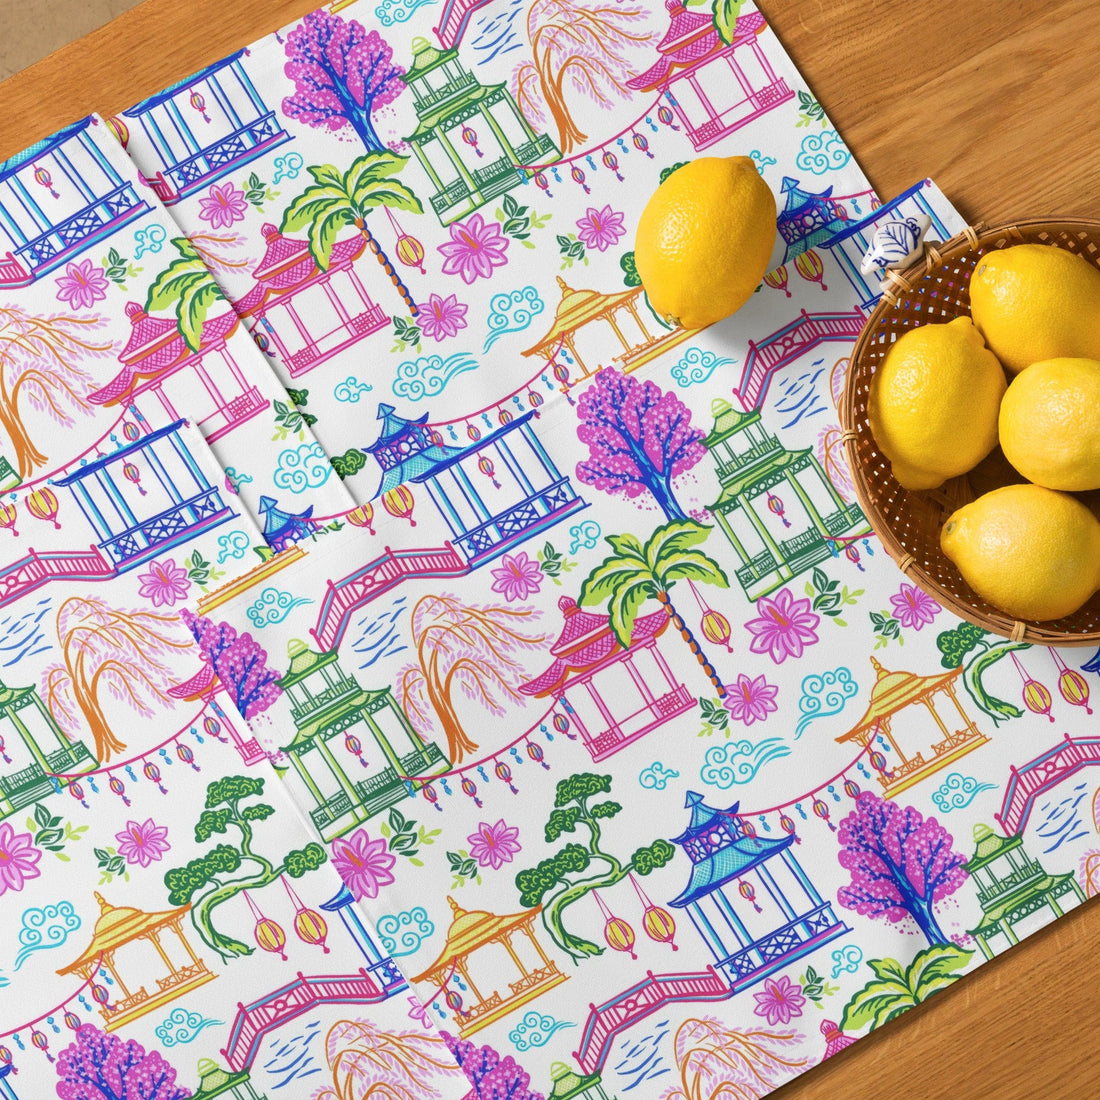 Kate McEnroe New York Set of 4 Tropical Chinoiserie Pagoda Garden Placemats in Blue, Pink, Green, Yellow by Kate McEnroe - KM13859924 Placemats 8908815_17484